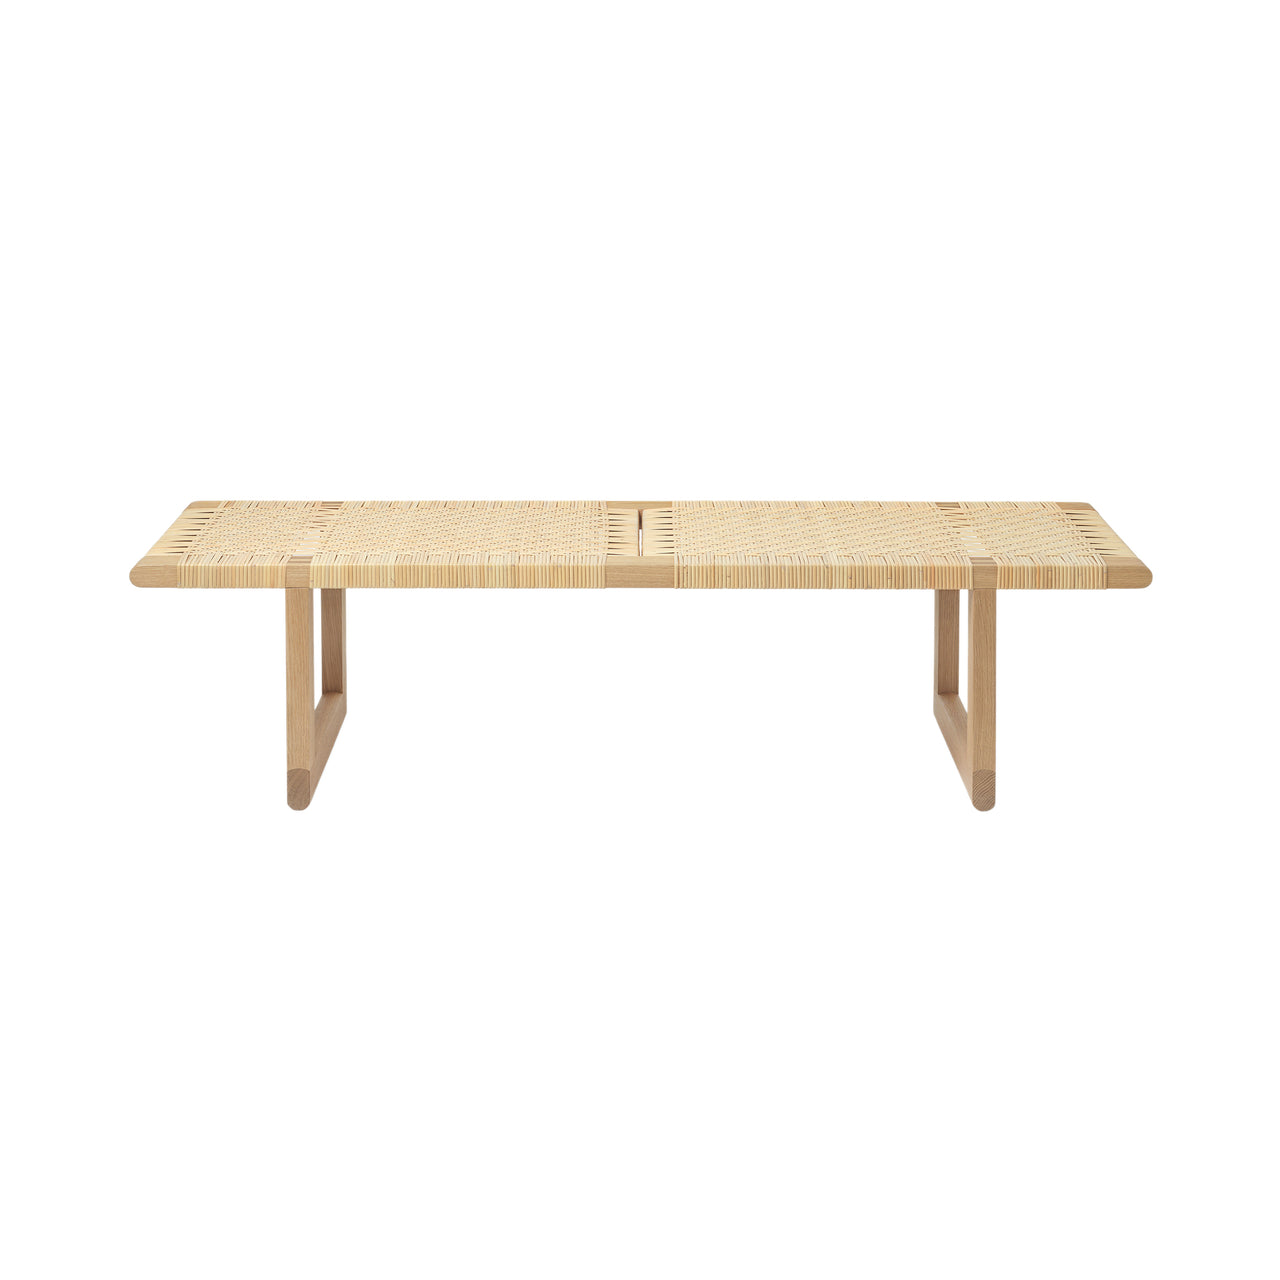 BM0488 Table Bench: Large - 54.3